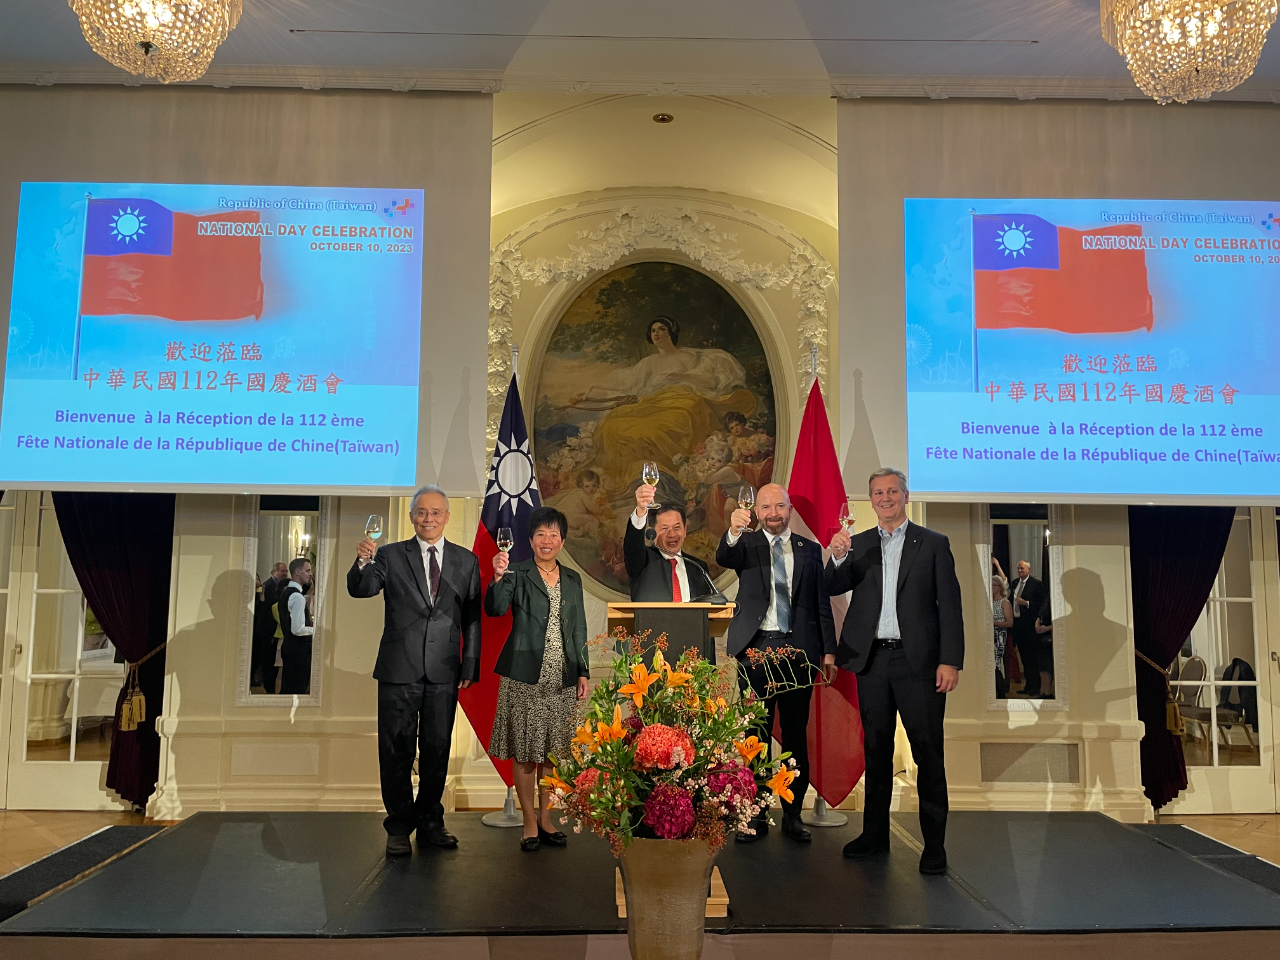 Dr. David Wei-Feng, Huang makes a toast with distinguished guests and celebrates the National Day of the Republic of China (Taiwan).